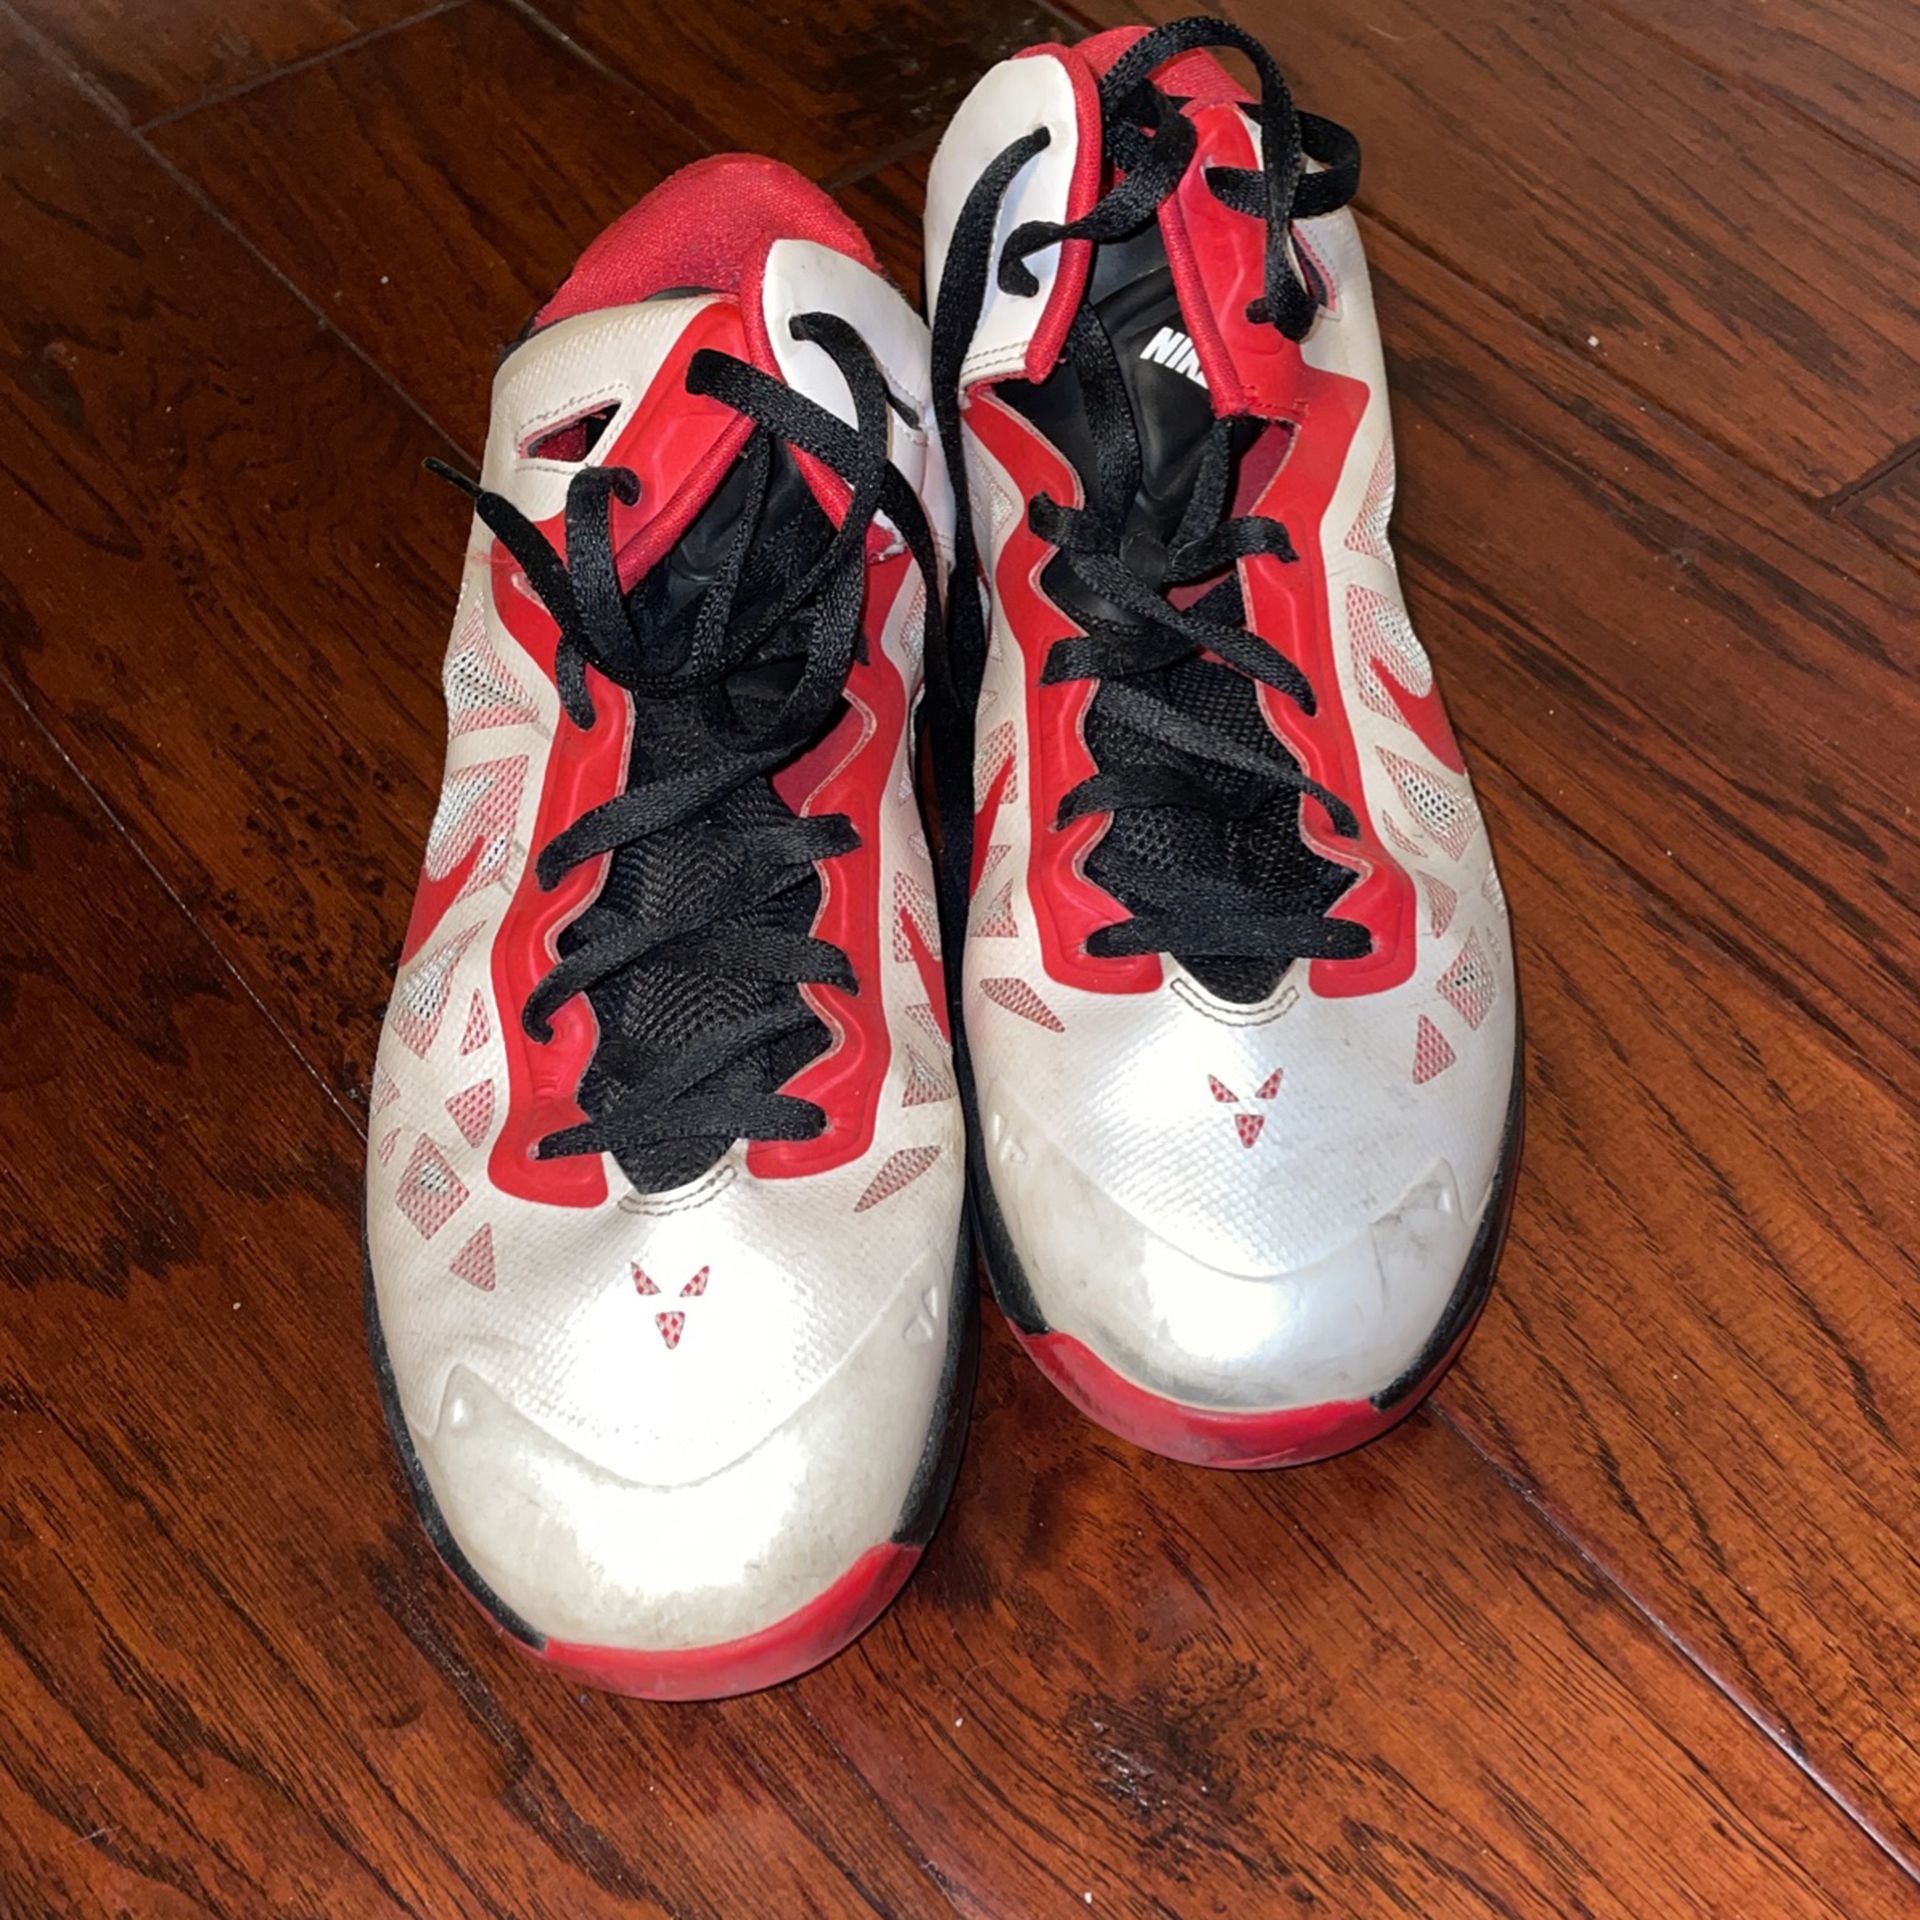 Nike Zoom Hyperchaos for Sale in Princeton, OfferUp